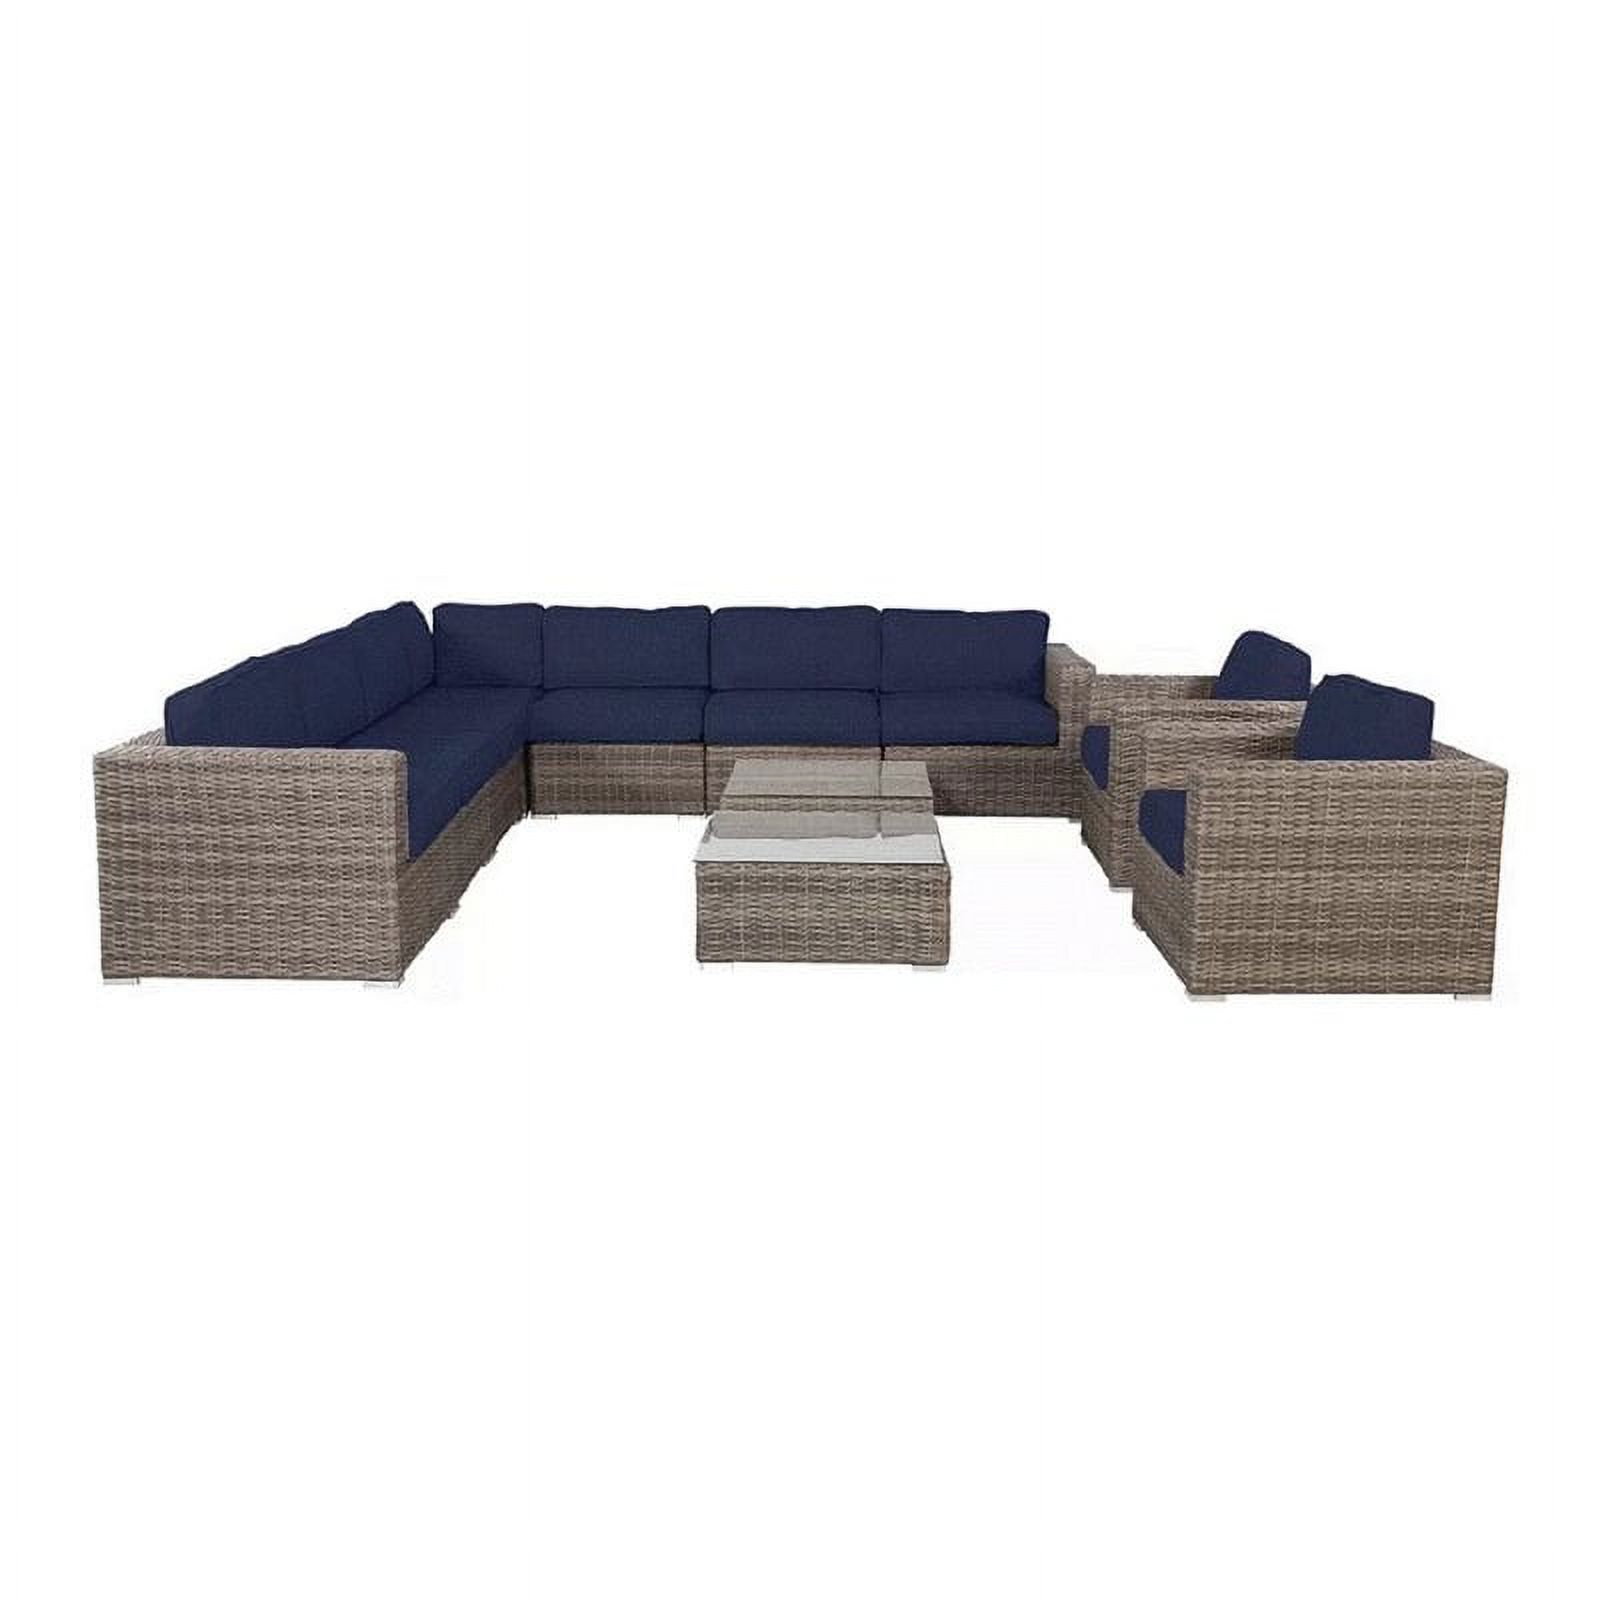 Living Source International 11-Piece Sectional Set with Cushions in Navy Blue - image 1 of 2